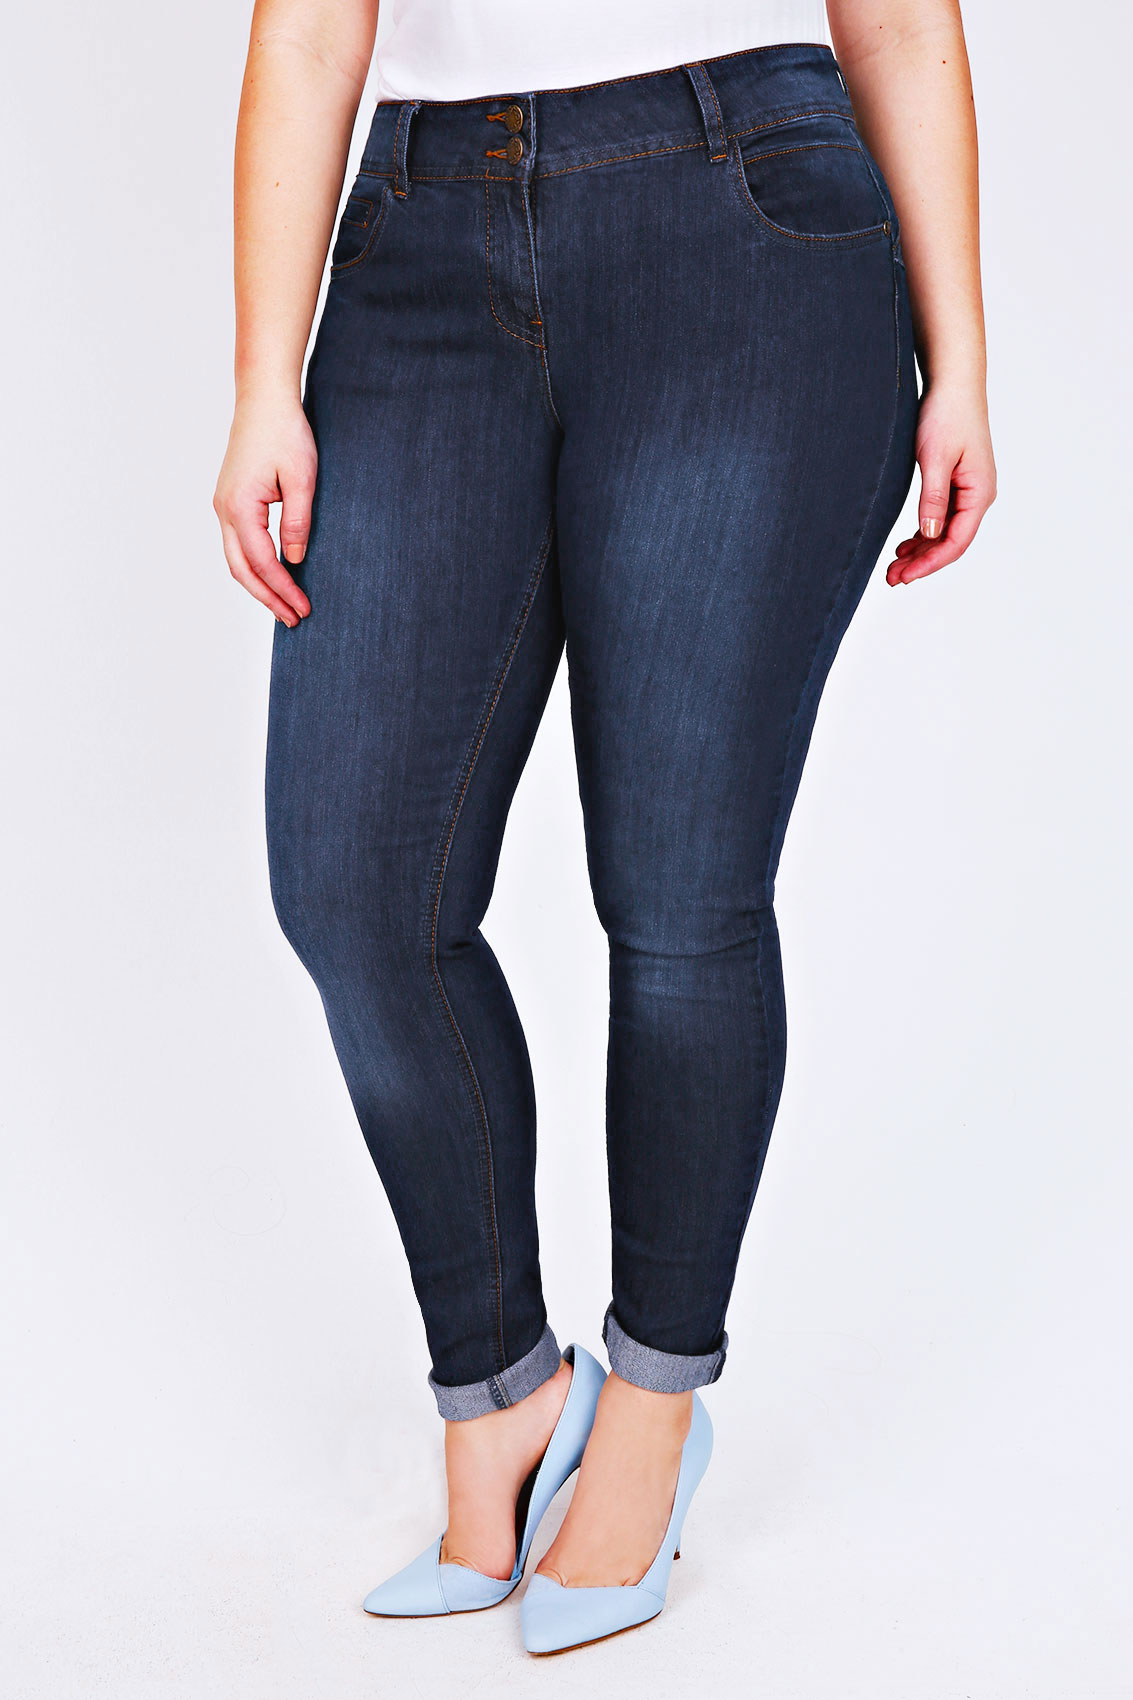 Indigo Skinny Shaper Jeans Available in 30